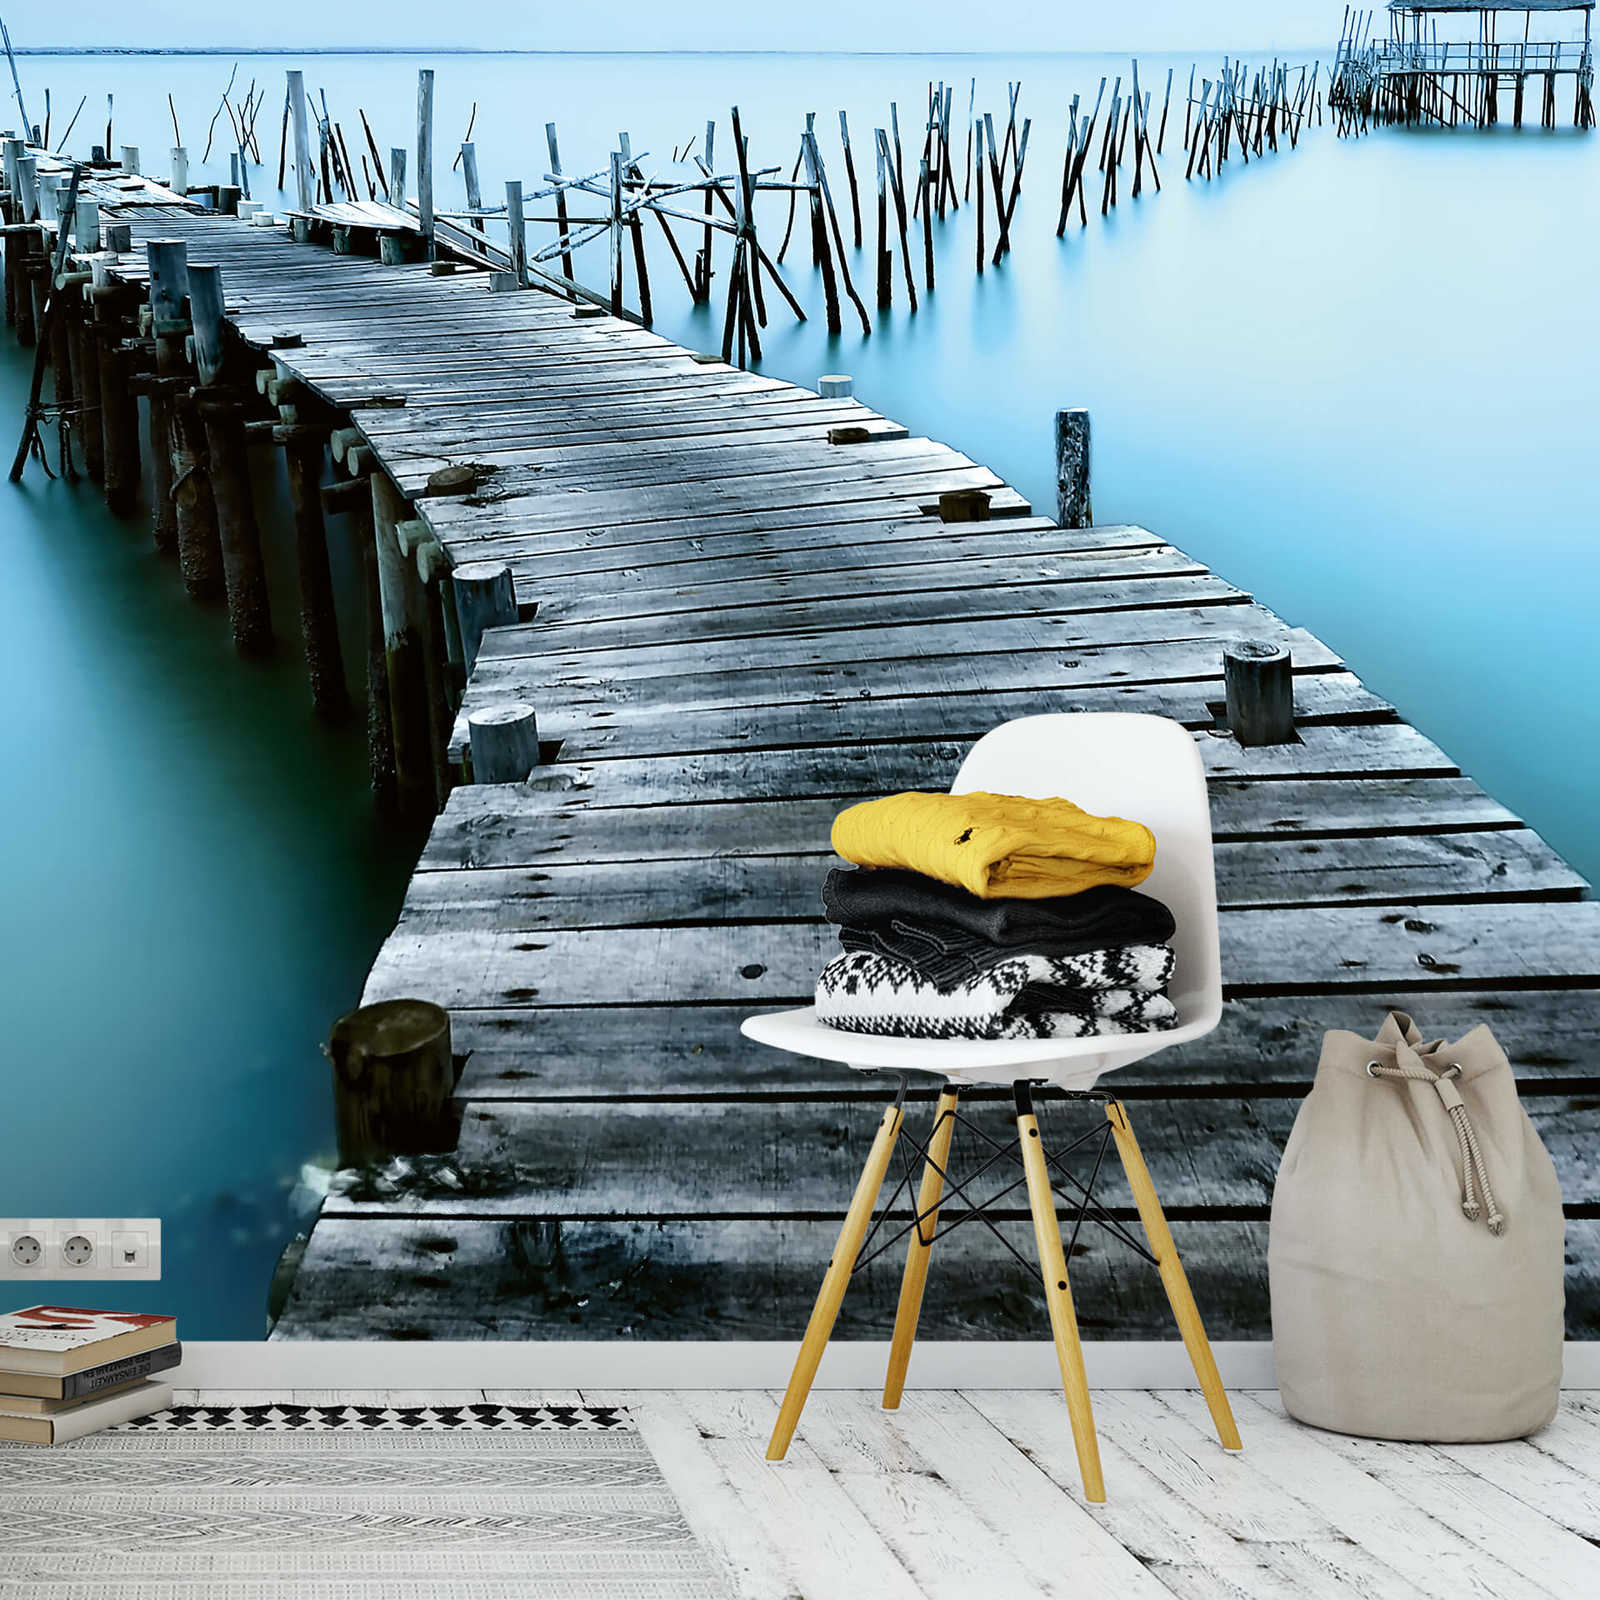             Photo wallpaper old jetty in the water - blue, grey
        